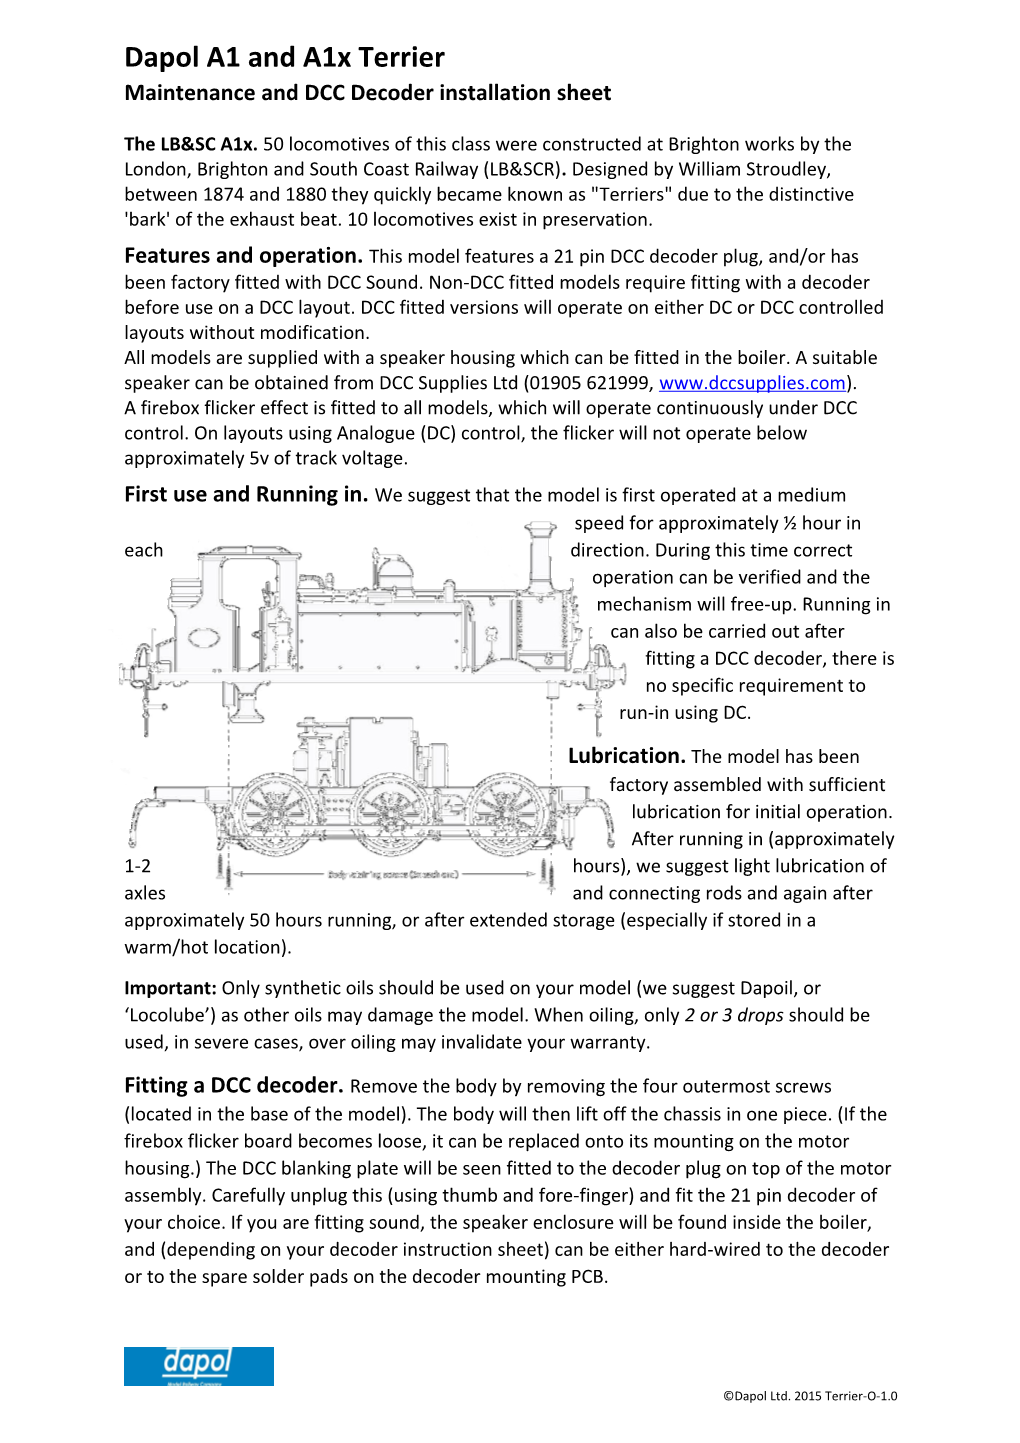 Dapol A1 and A1x Terrier Maintenance and DCC Decoder Installation Sheet